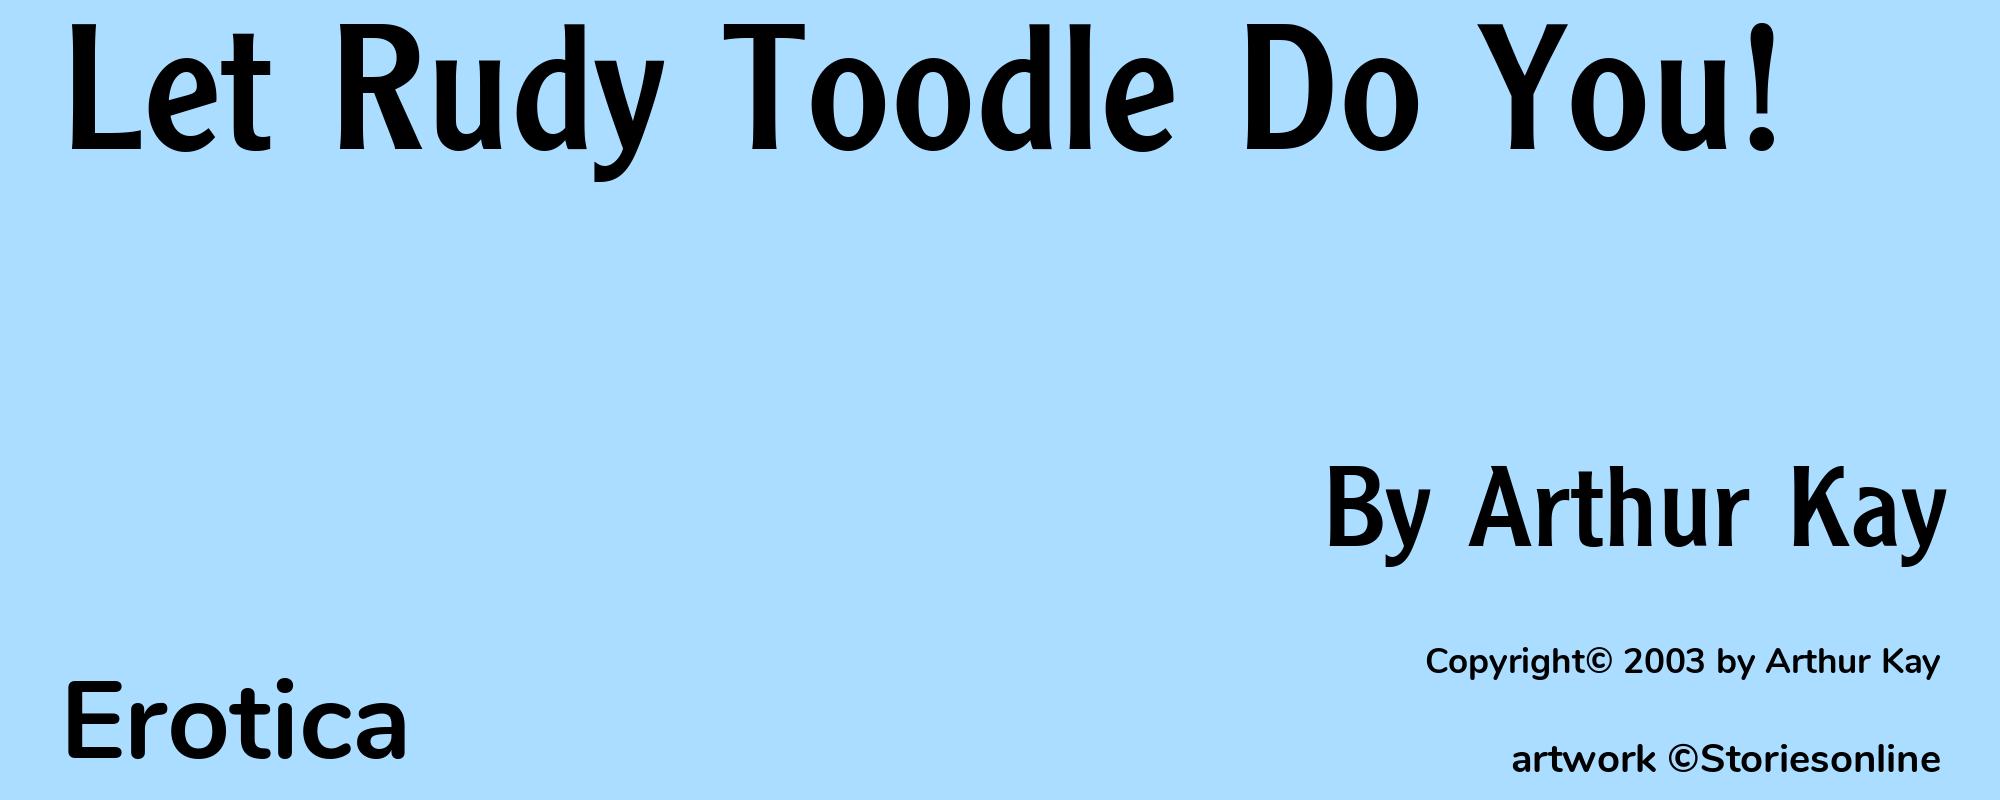 Let Rudy Toodle Do You! - Cover